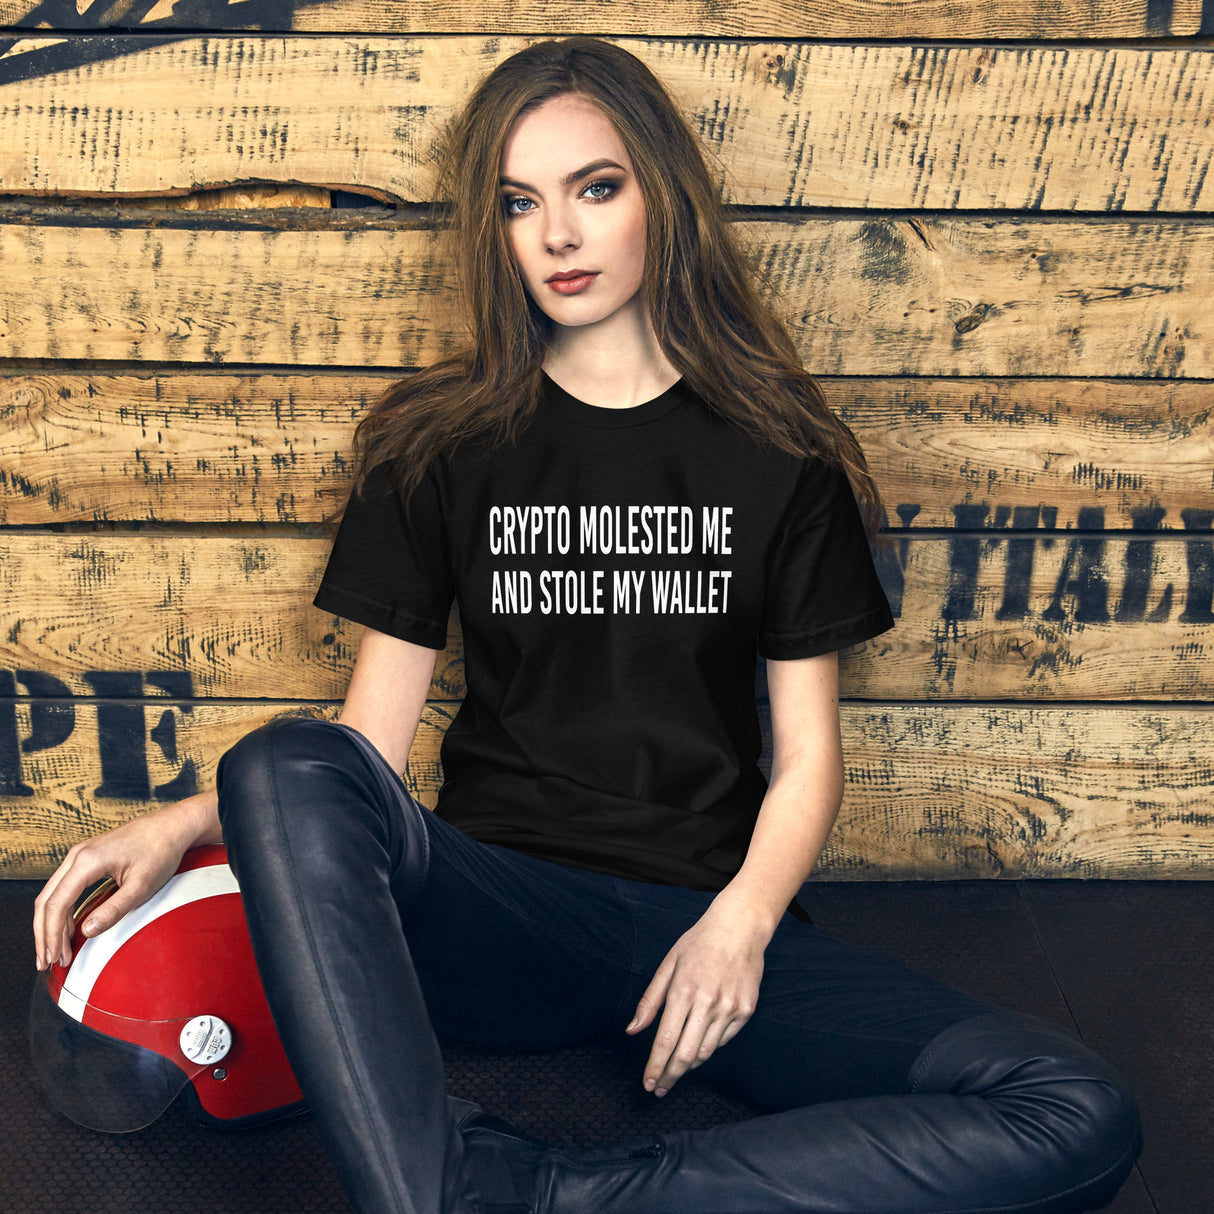 Crypto Molested Me and Stole My Wallet Women's Shirt